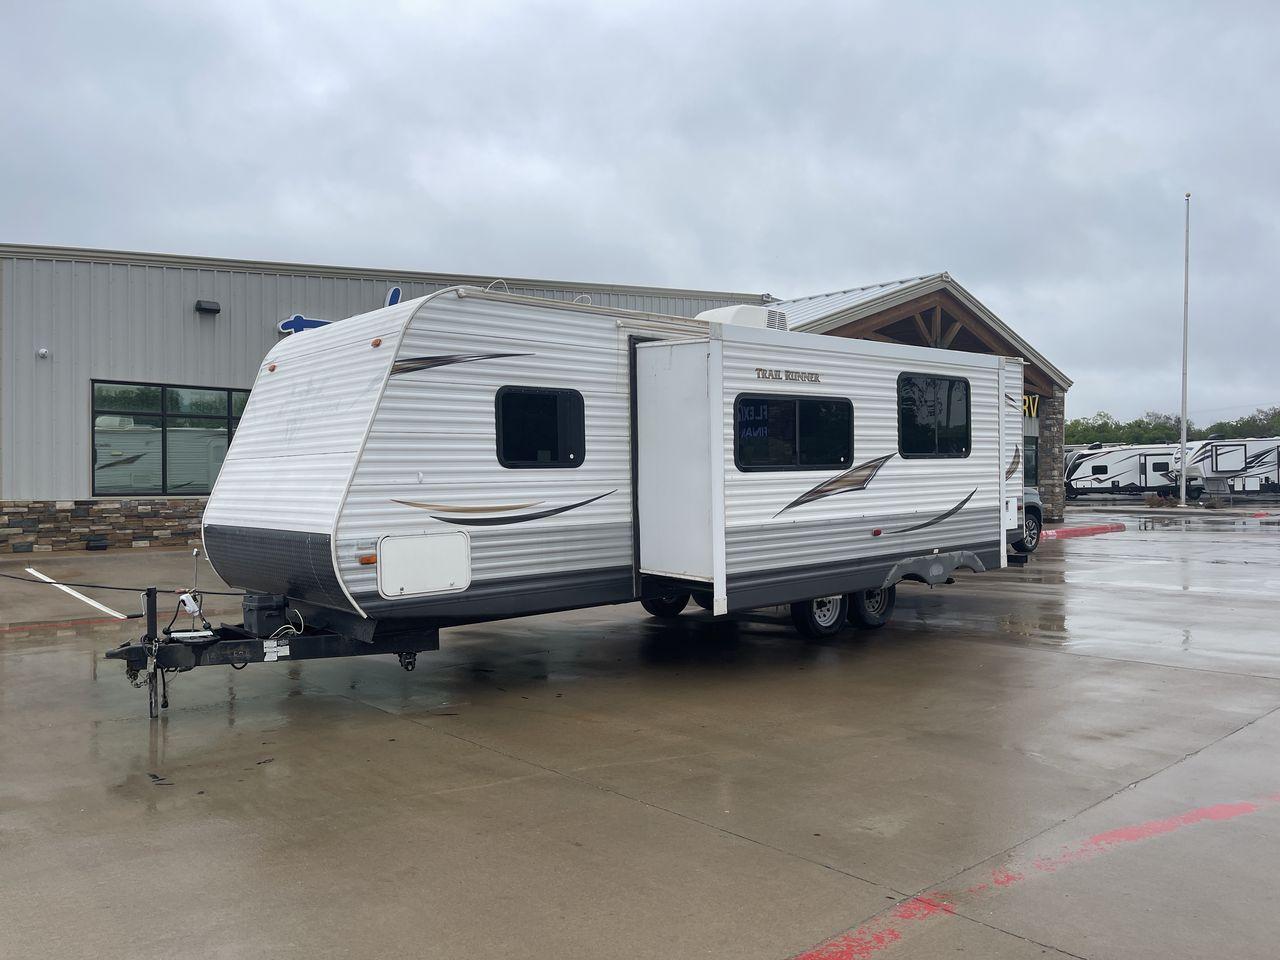 2013 TRAIL RUNNER 29FQBS (5SFEB3228DE) , Length: 32.33 ft. | Dry Weight: 6,724 lbs. | Slides: 1 transmission, located at 4319 N Main St, Cleburne, TX, 76033, (817) 678-5133, 32.385960, -97.391212 - This 2013 Trail Runner 29FQBS is a single-slide travel trailer measuring approximately 32.33 feet long. It has a dry weight of 6,724 lbs. and a carrying capacity of 2,276 lbs. It also has a manageable hitch weight of 738 lbs. As you enter the camper, you will find the kitchen section immediately to - Photo #23